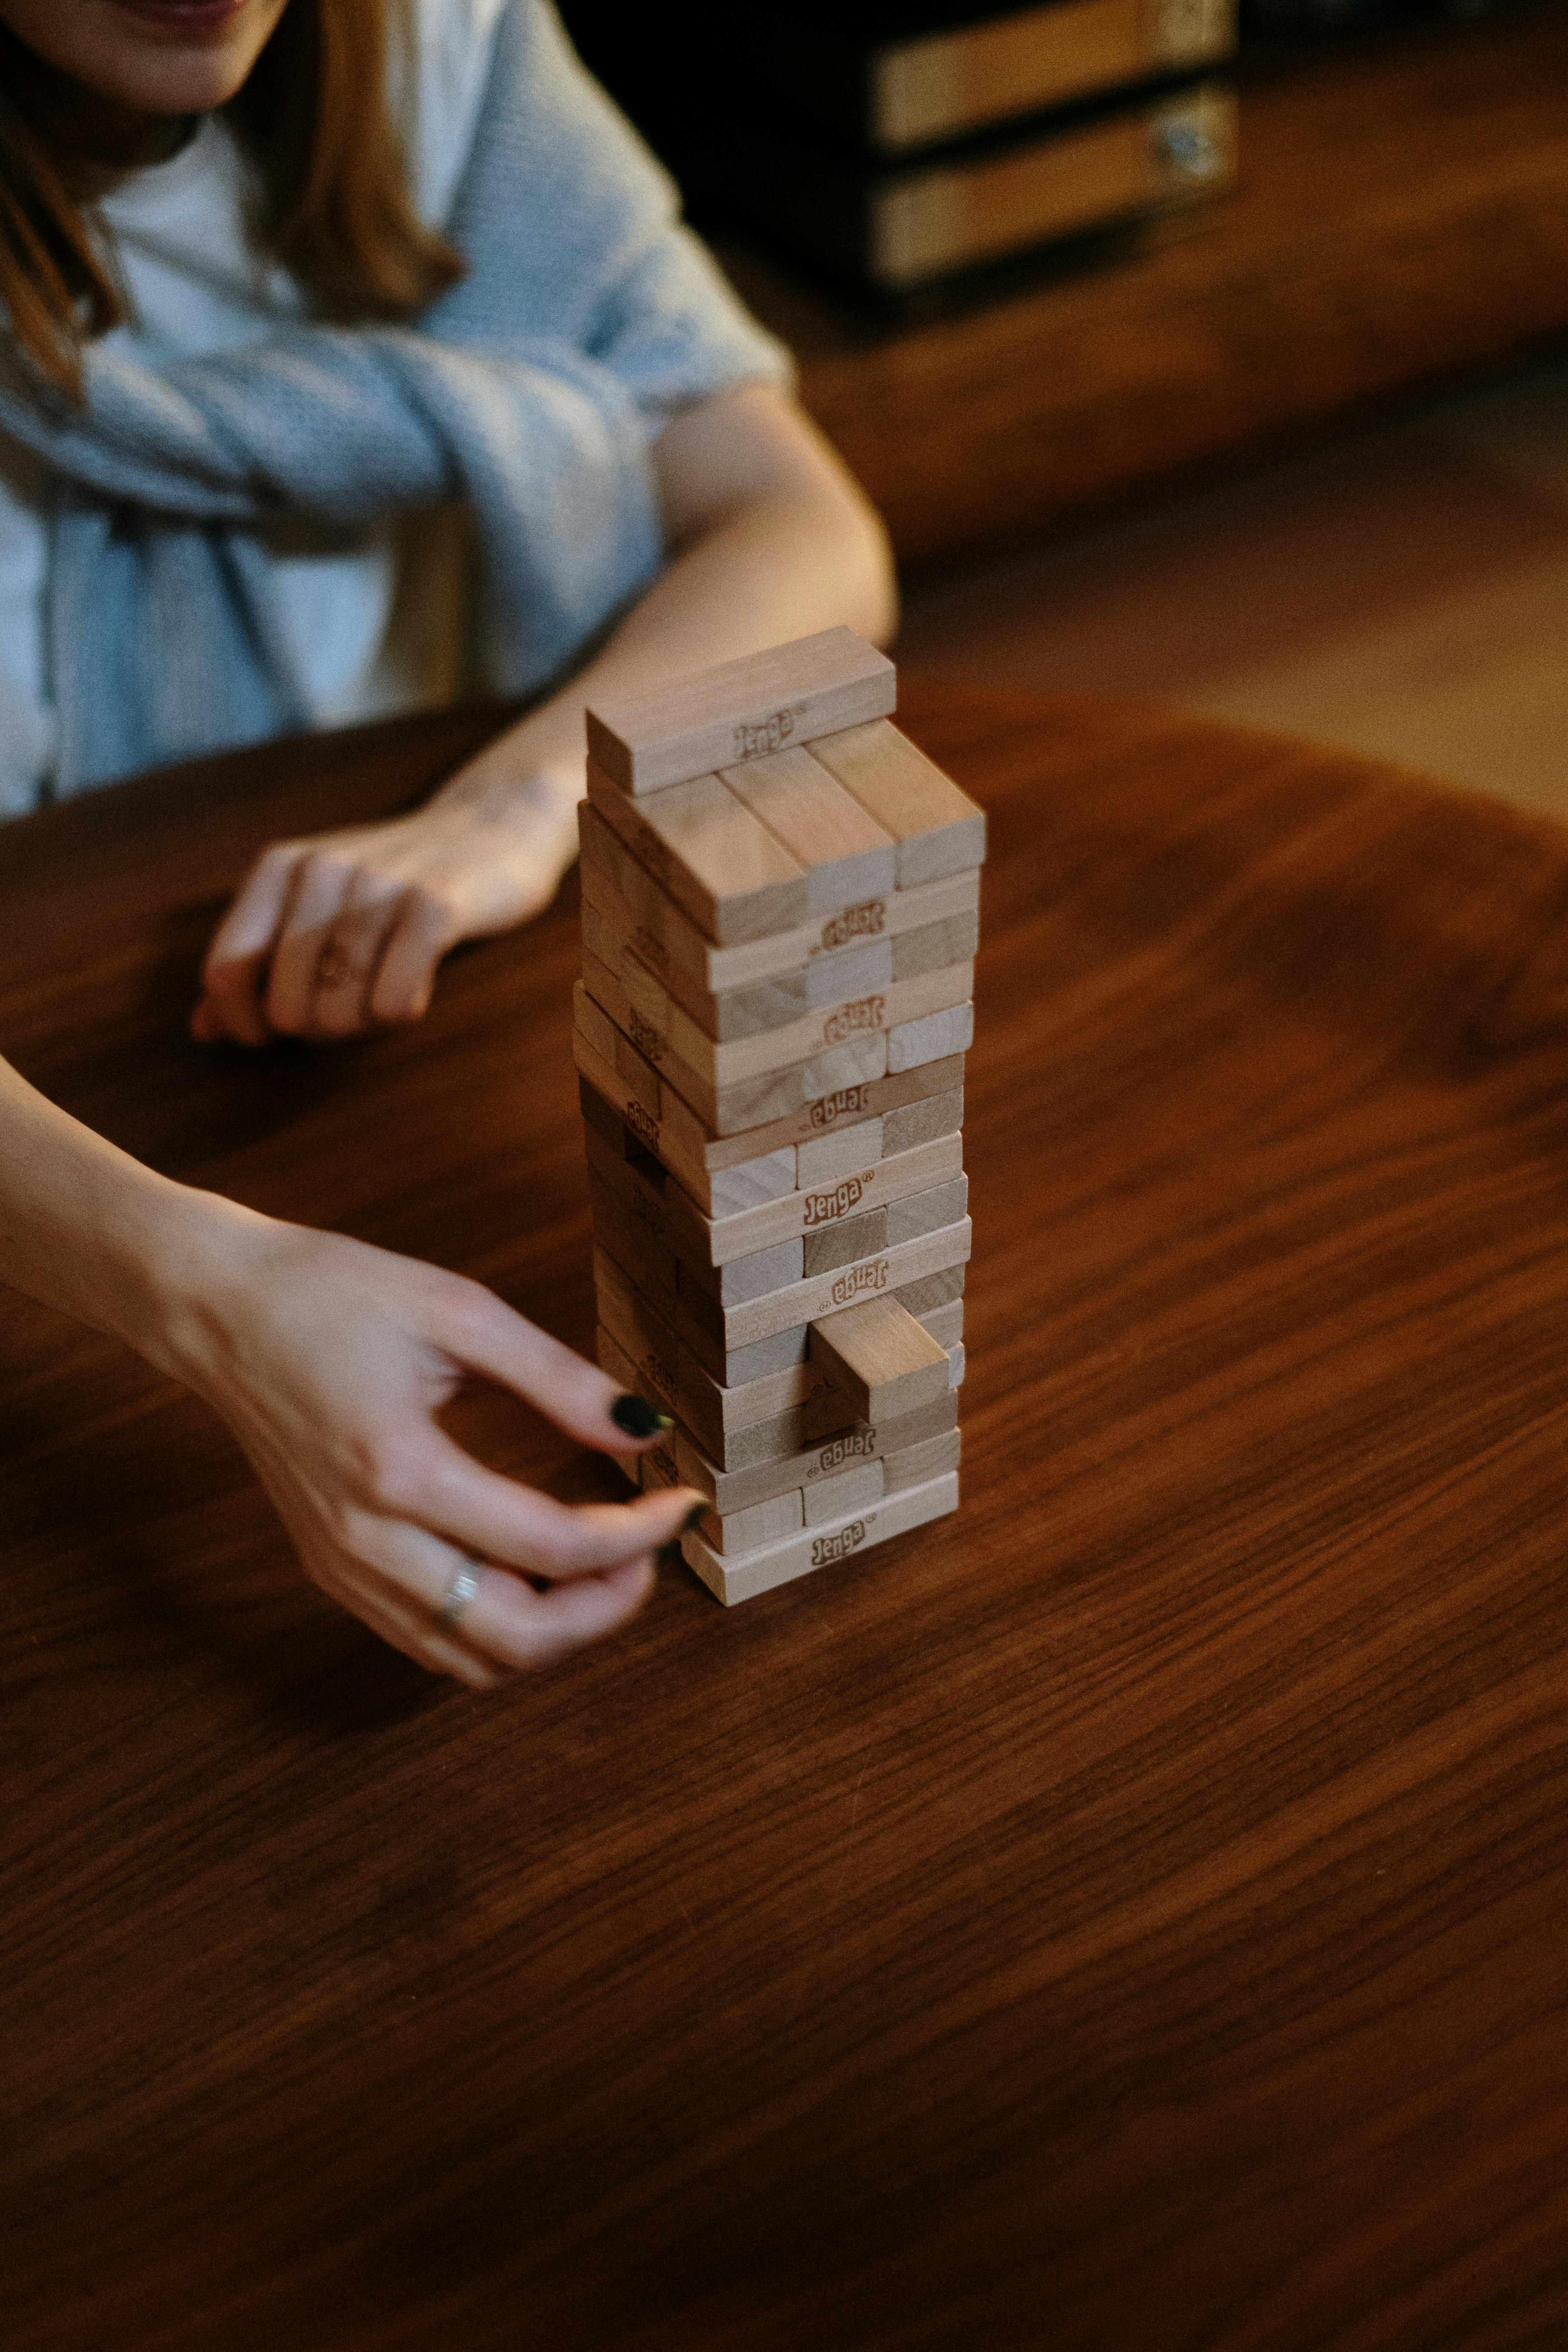 46 Large Jenga Images, Stock Photos, 3D objects, & Vectors | Shutterstock